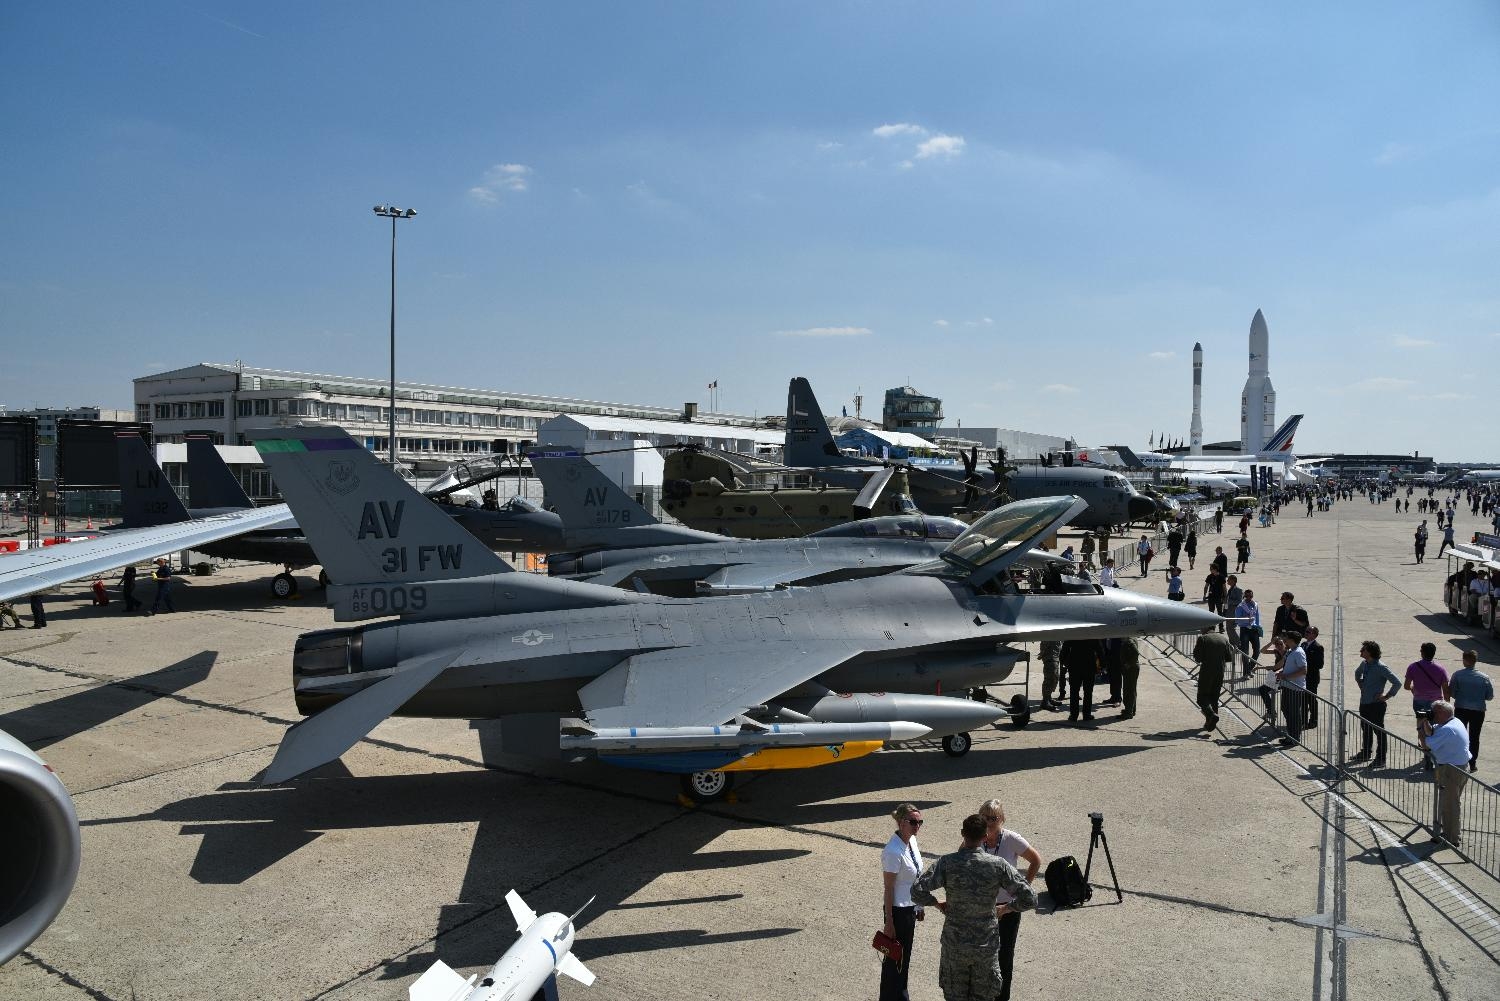 AIA works with the US government to establish an American presence at airshows around the globe. 